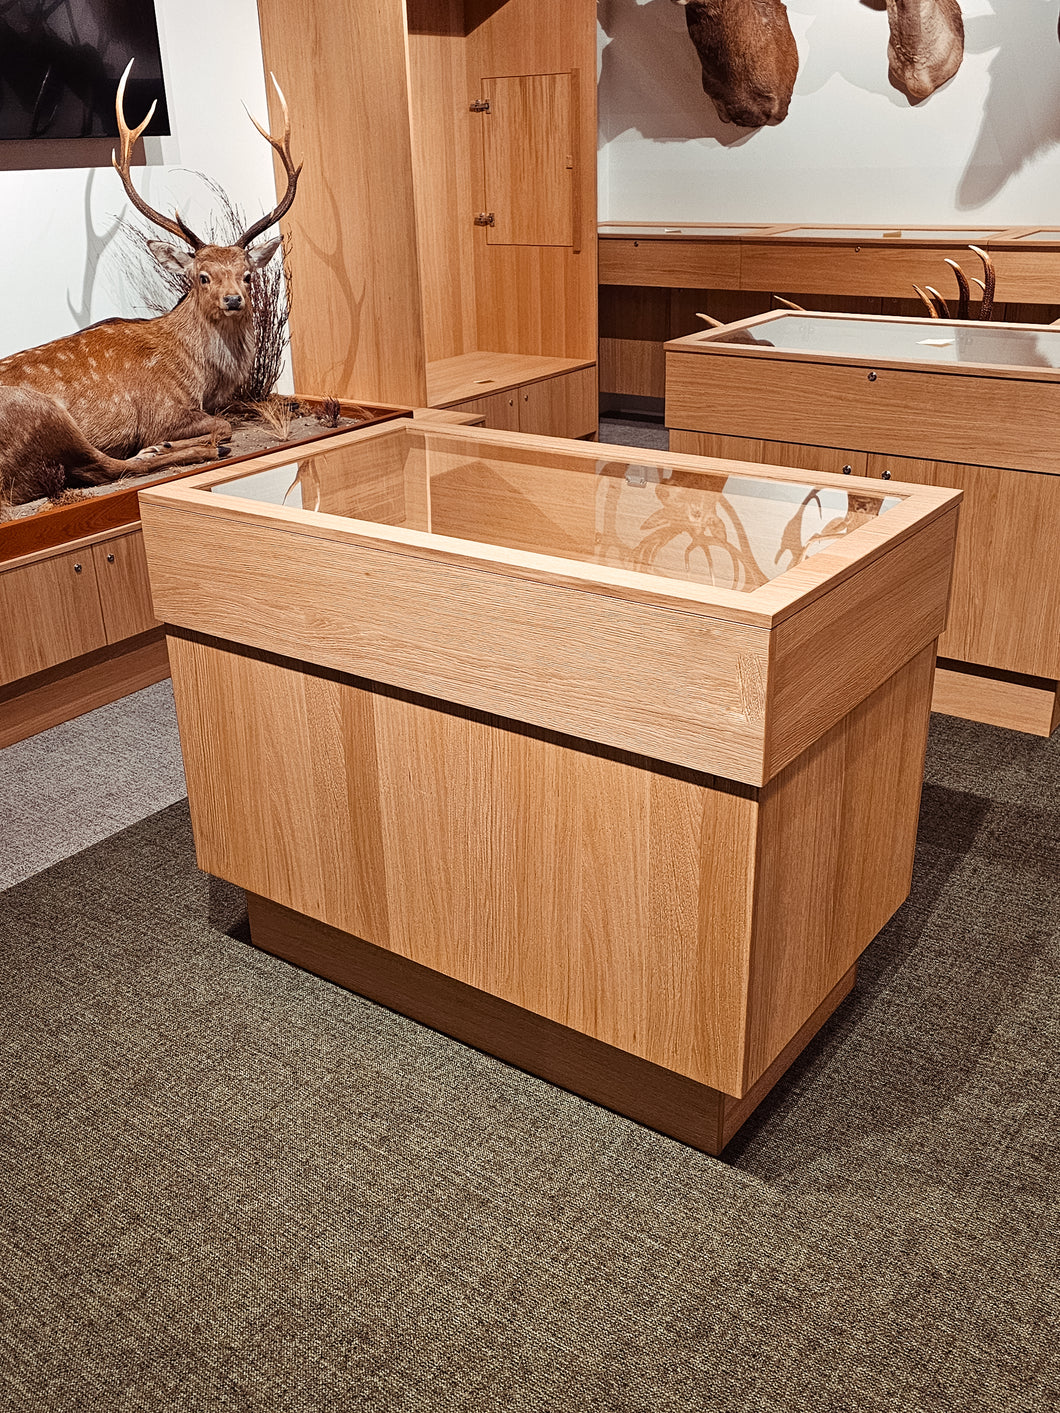 Sika Display Case | $5,000 Donation | NZ Hunting and Shooting Museum Display Cabinet